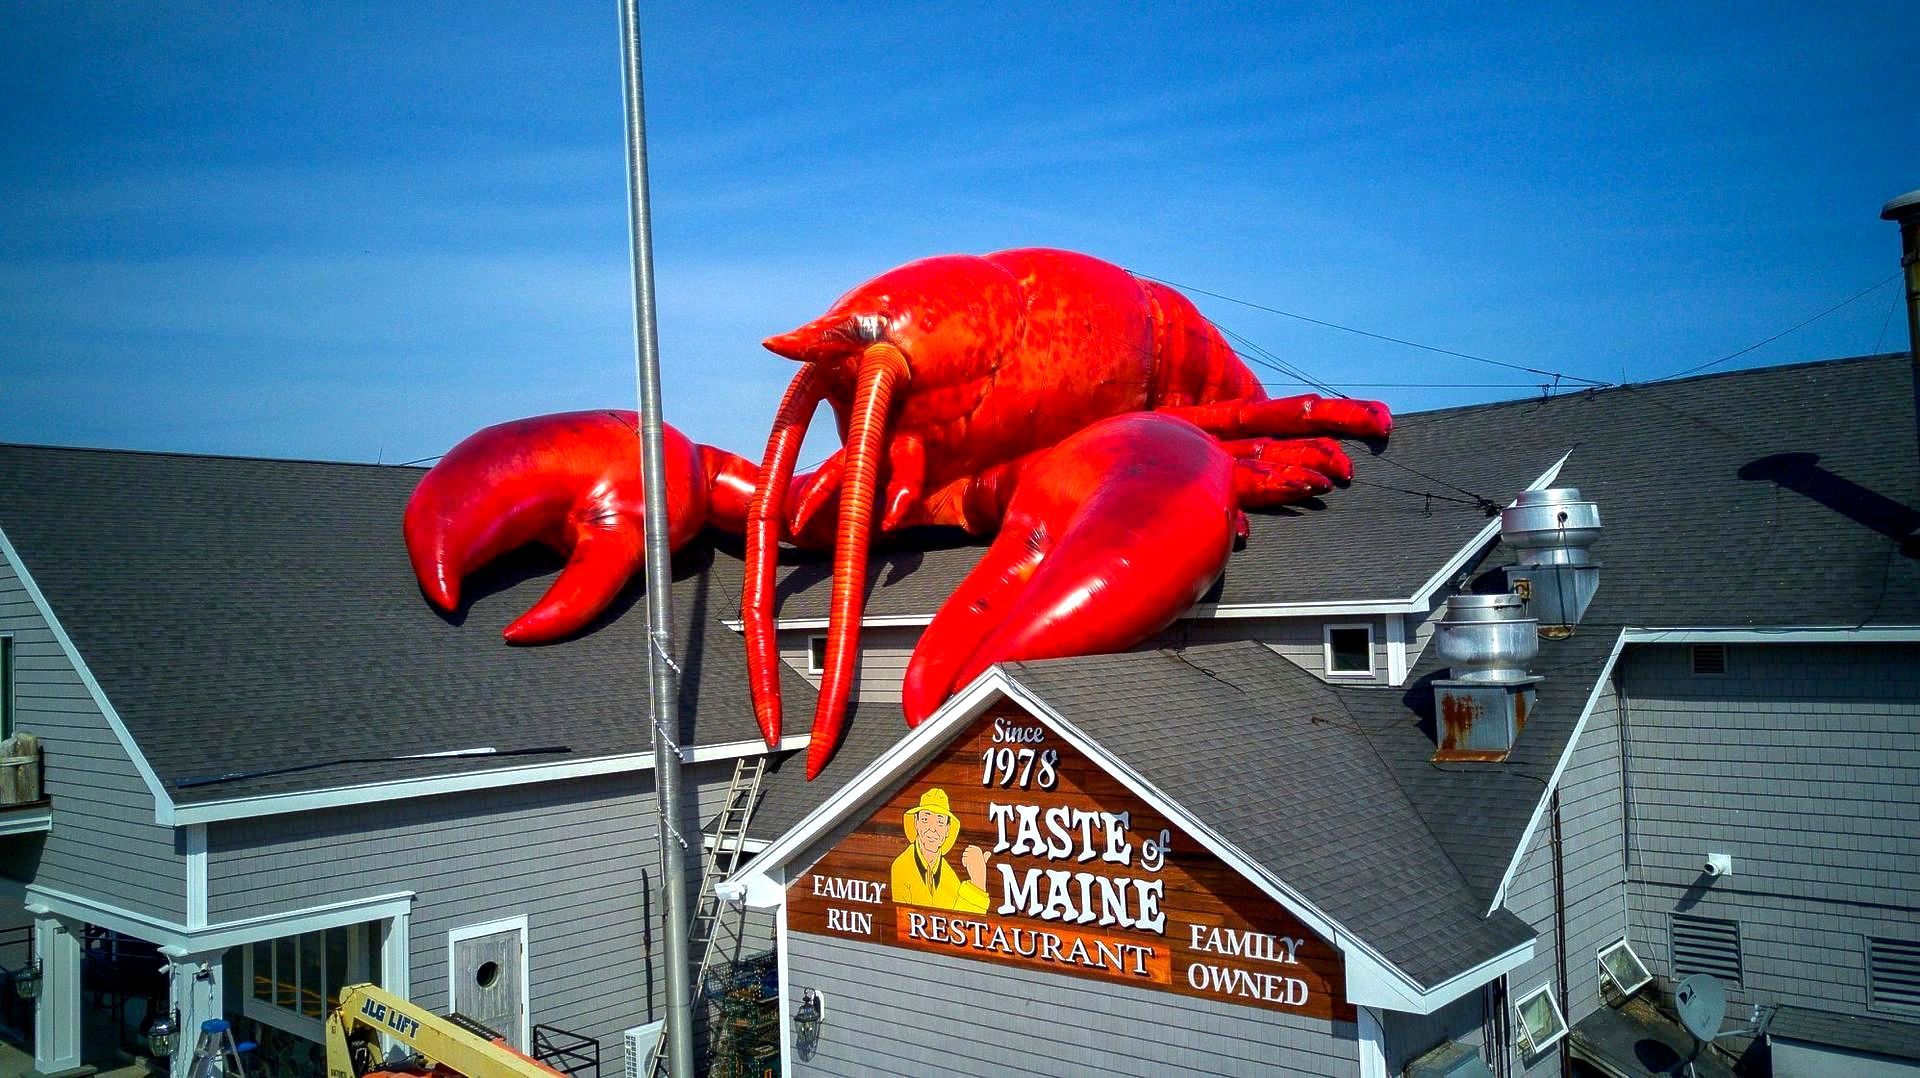 
World’s Largest Inflatable Lobster, world record in Woolwich, Maine